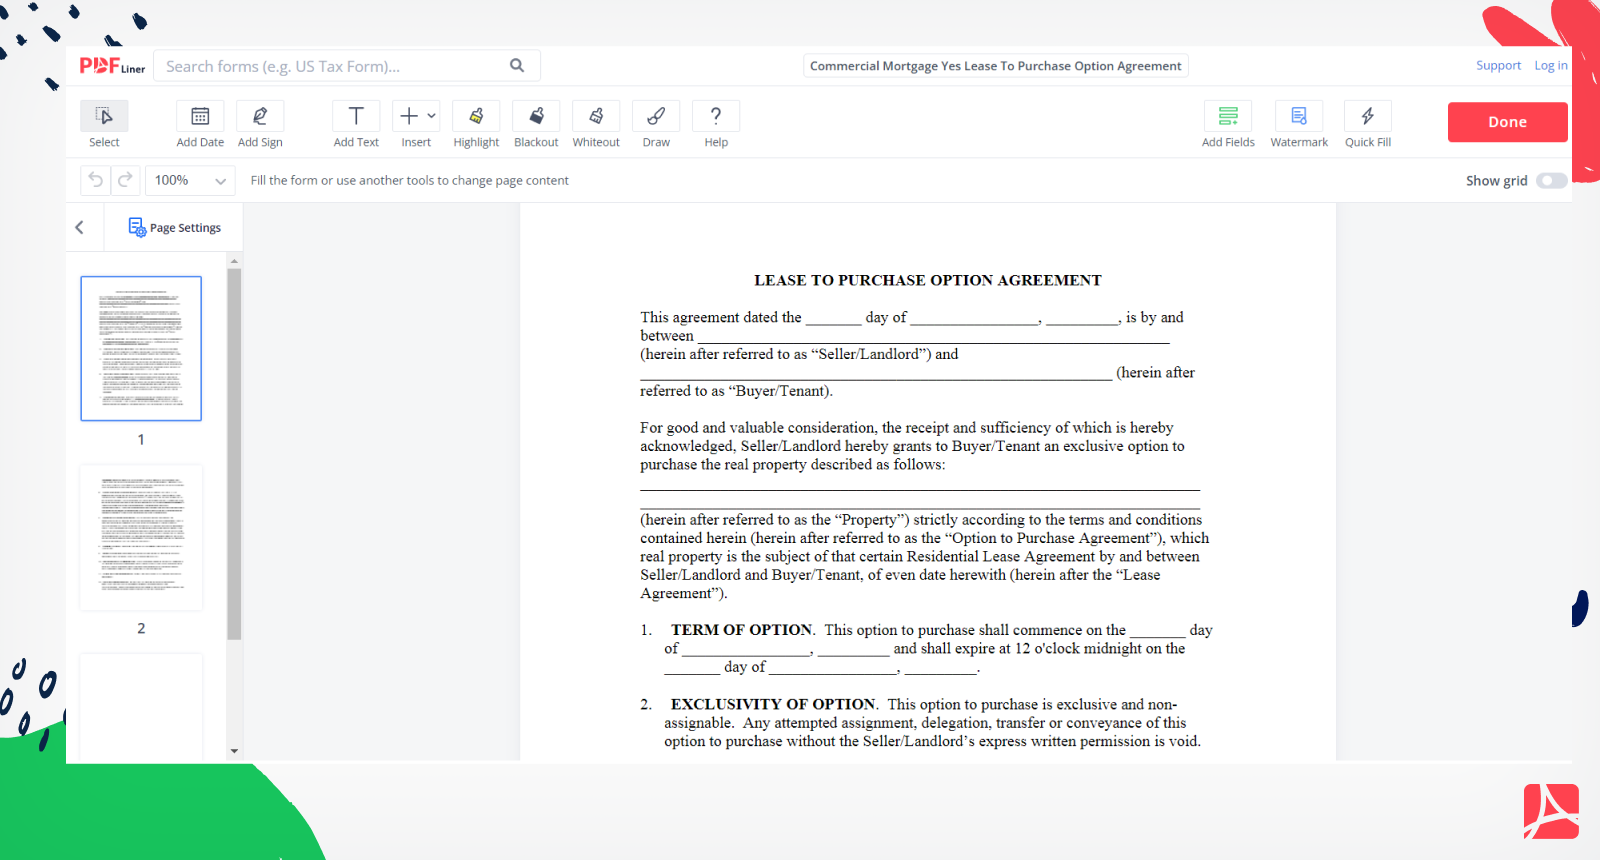 Commercial Mortgage Yes Lease To Purchase Option Agreement Form Screenshot